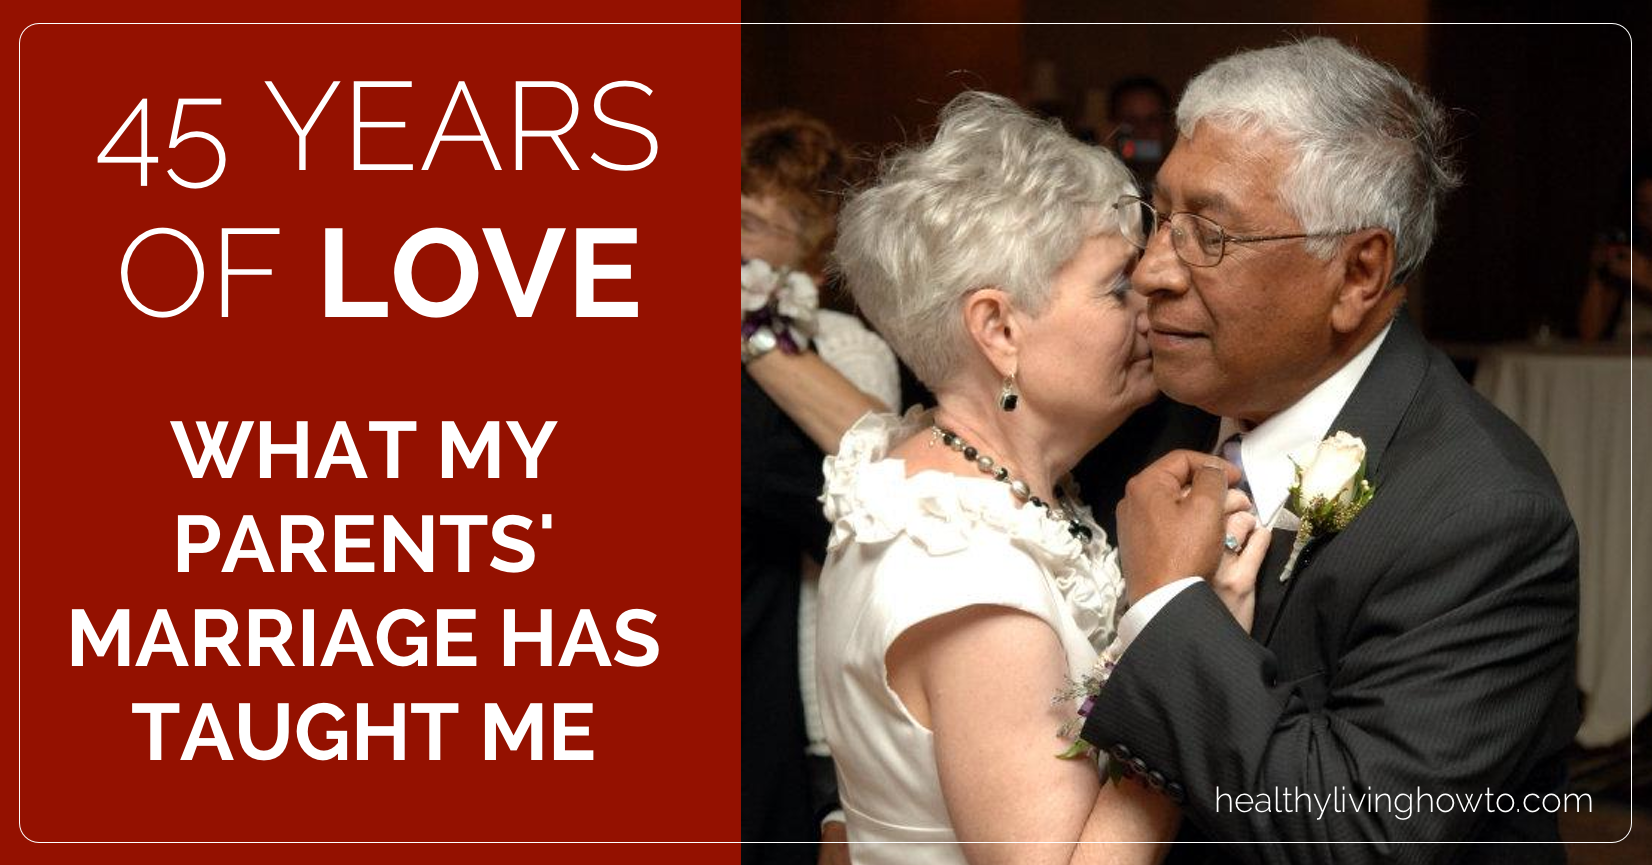 45 Years of Love. What My Parents' Marriage Has Taught Me | healthylivinghowto.com